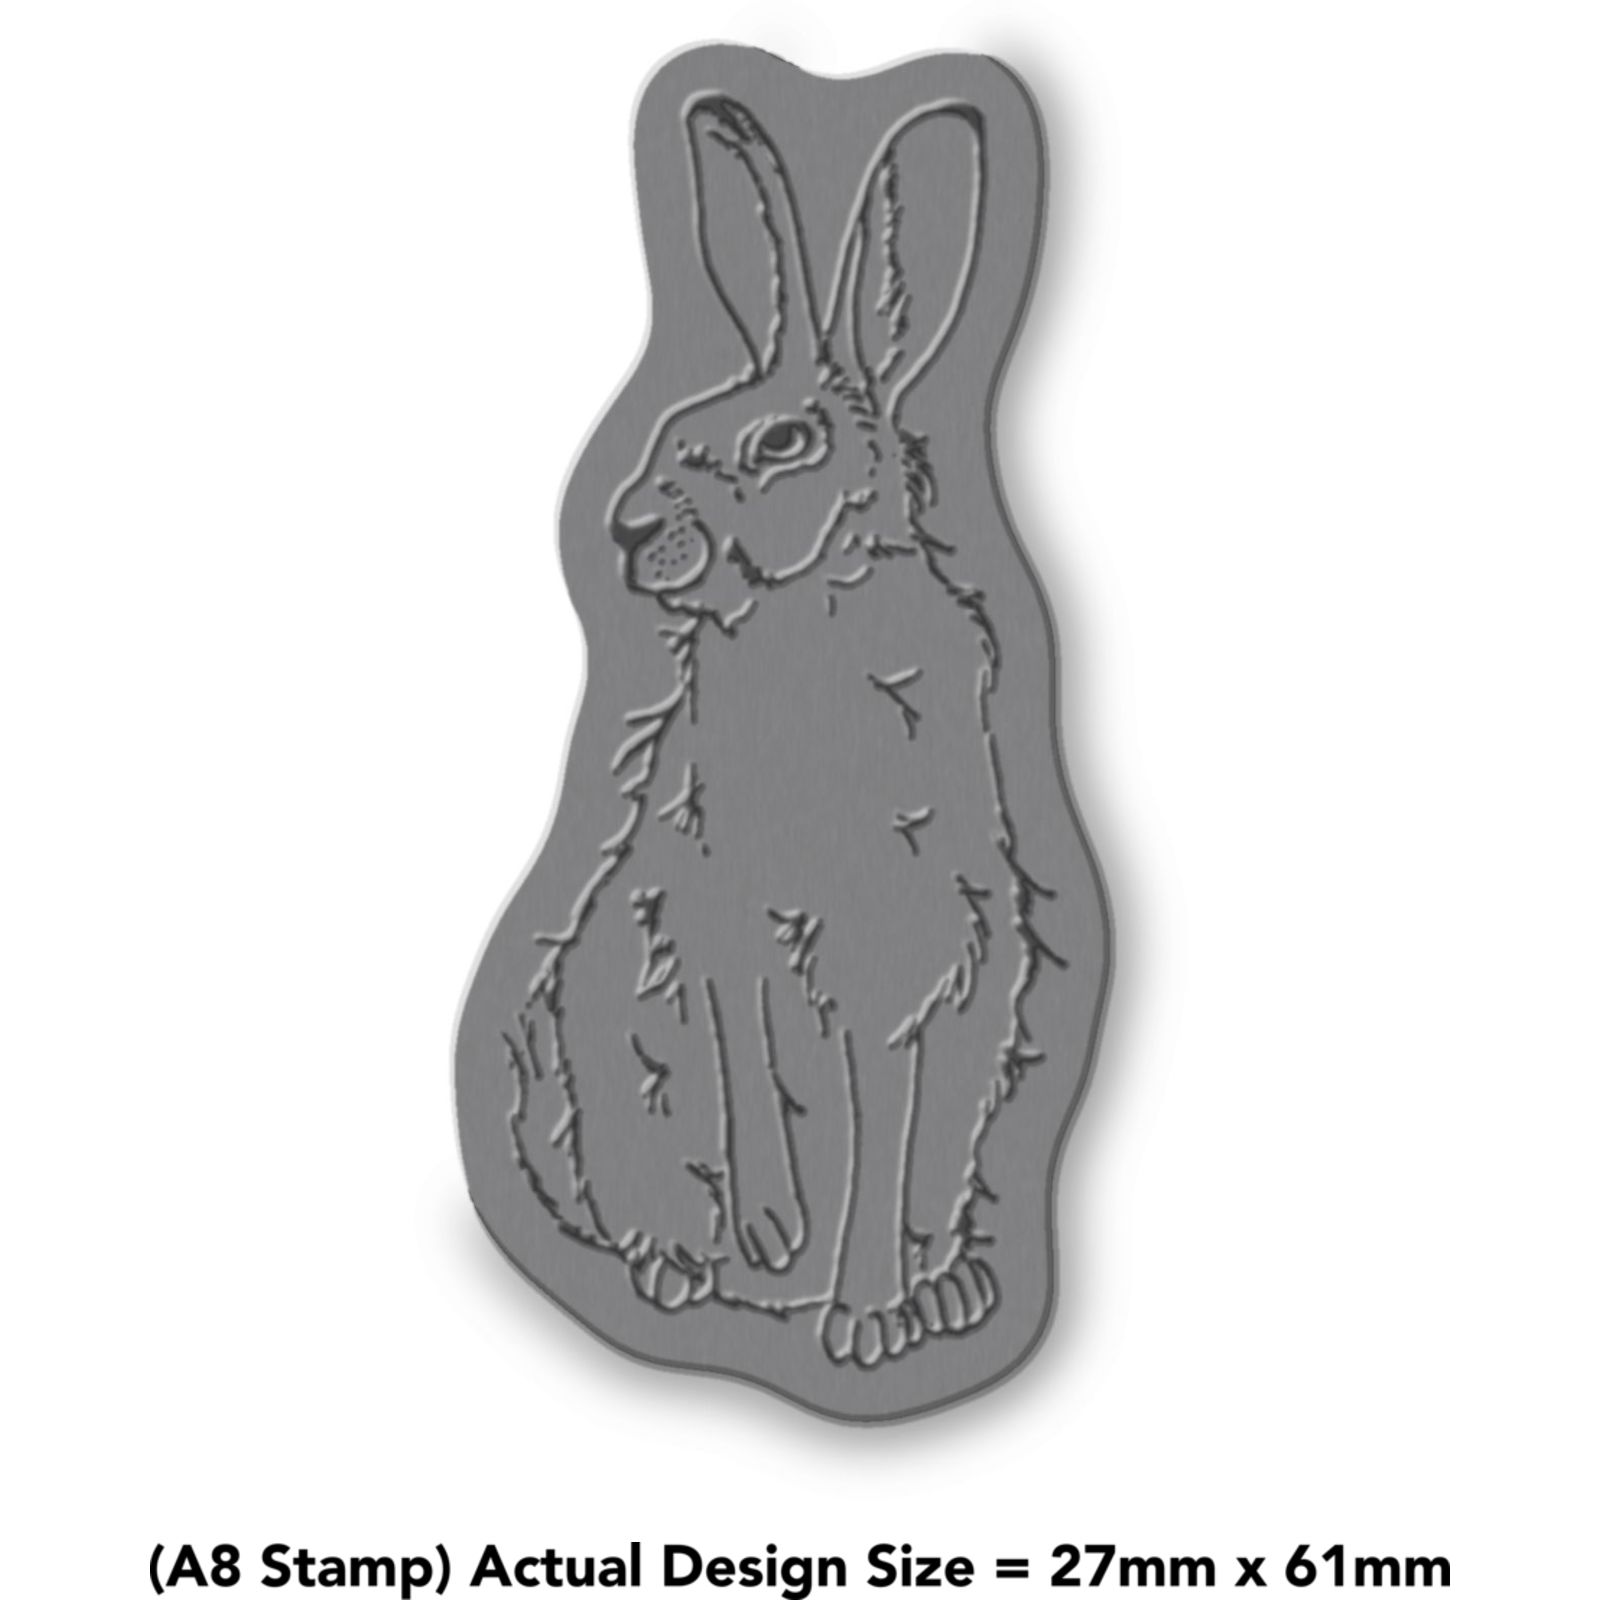 RS010953 'Patterned Hare' Rubber Stamp 